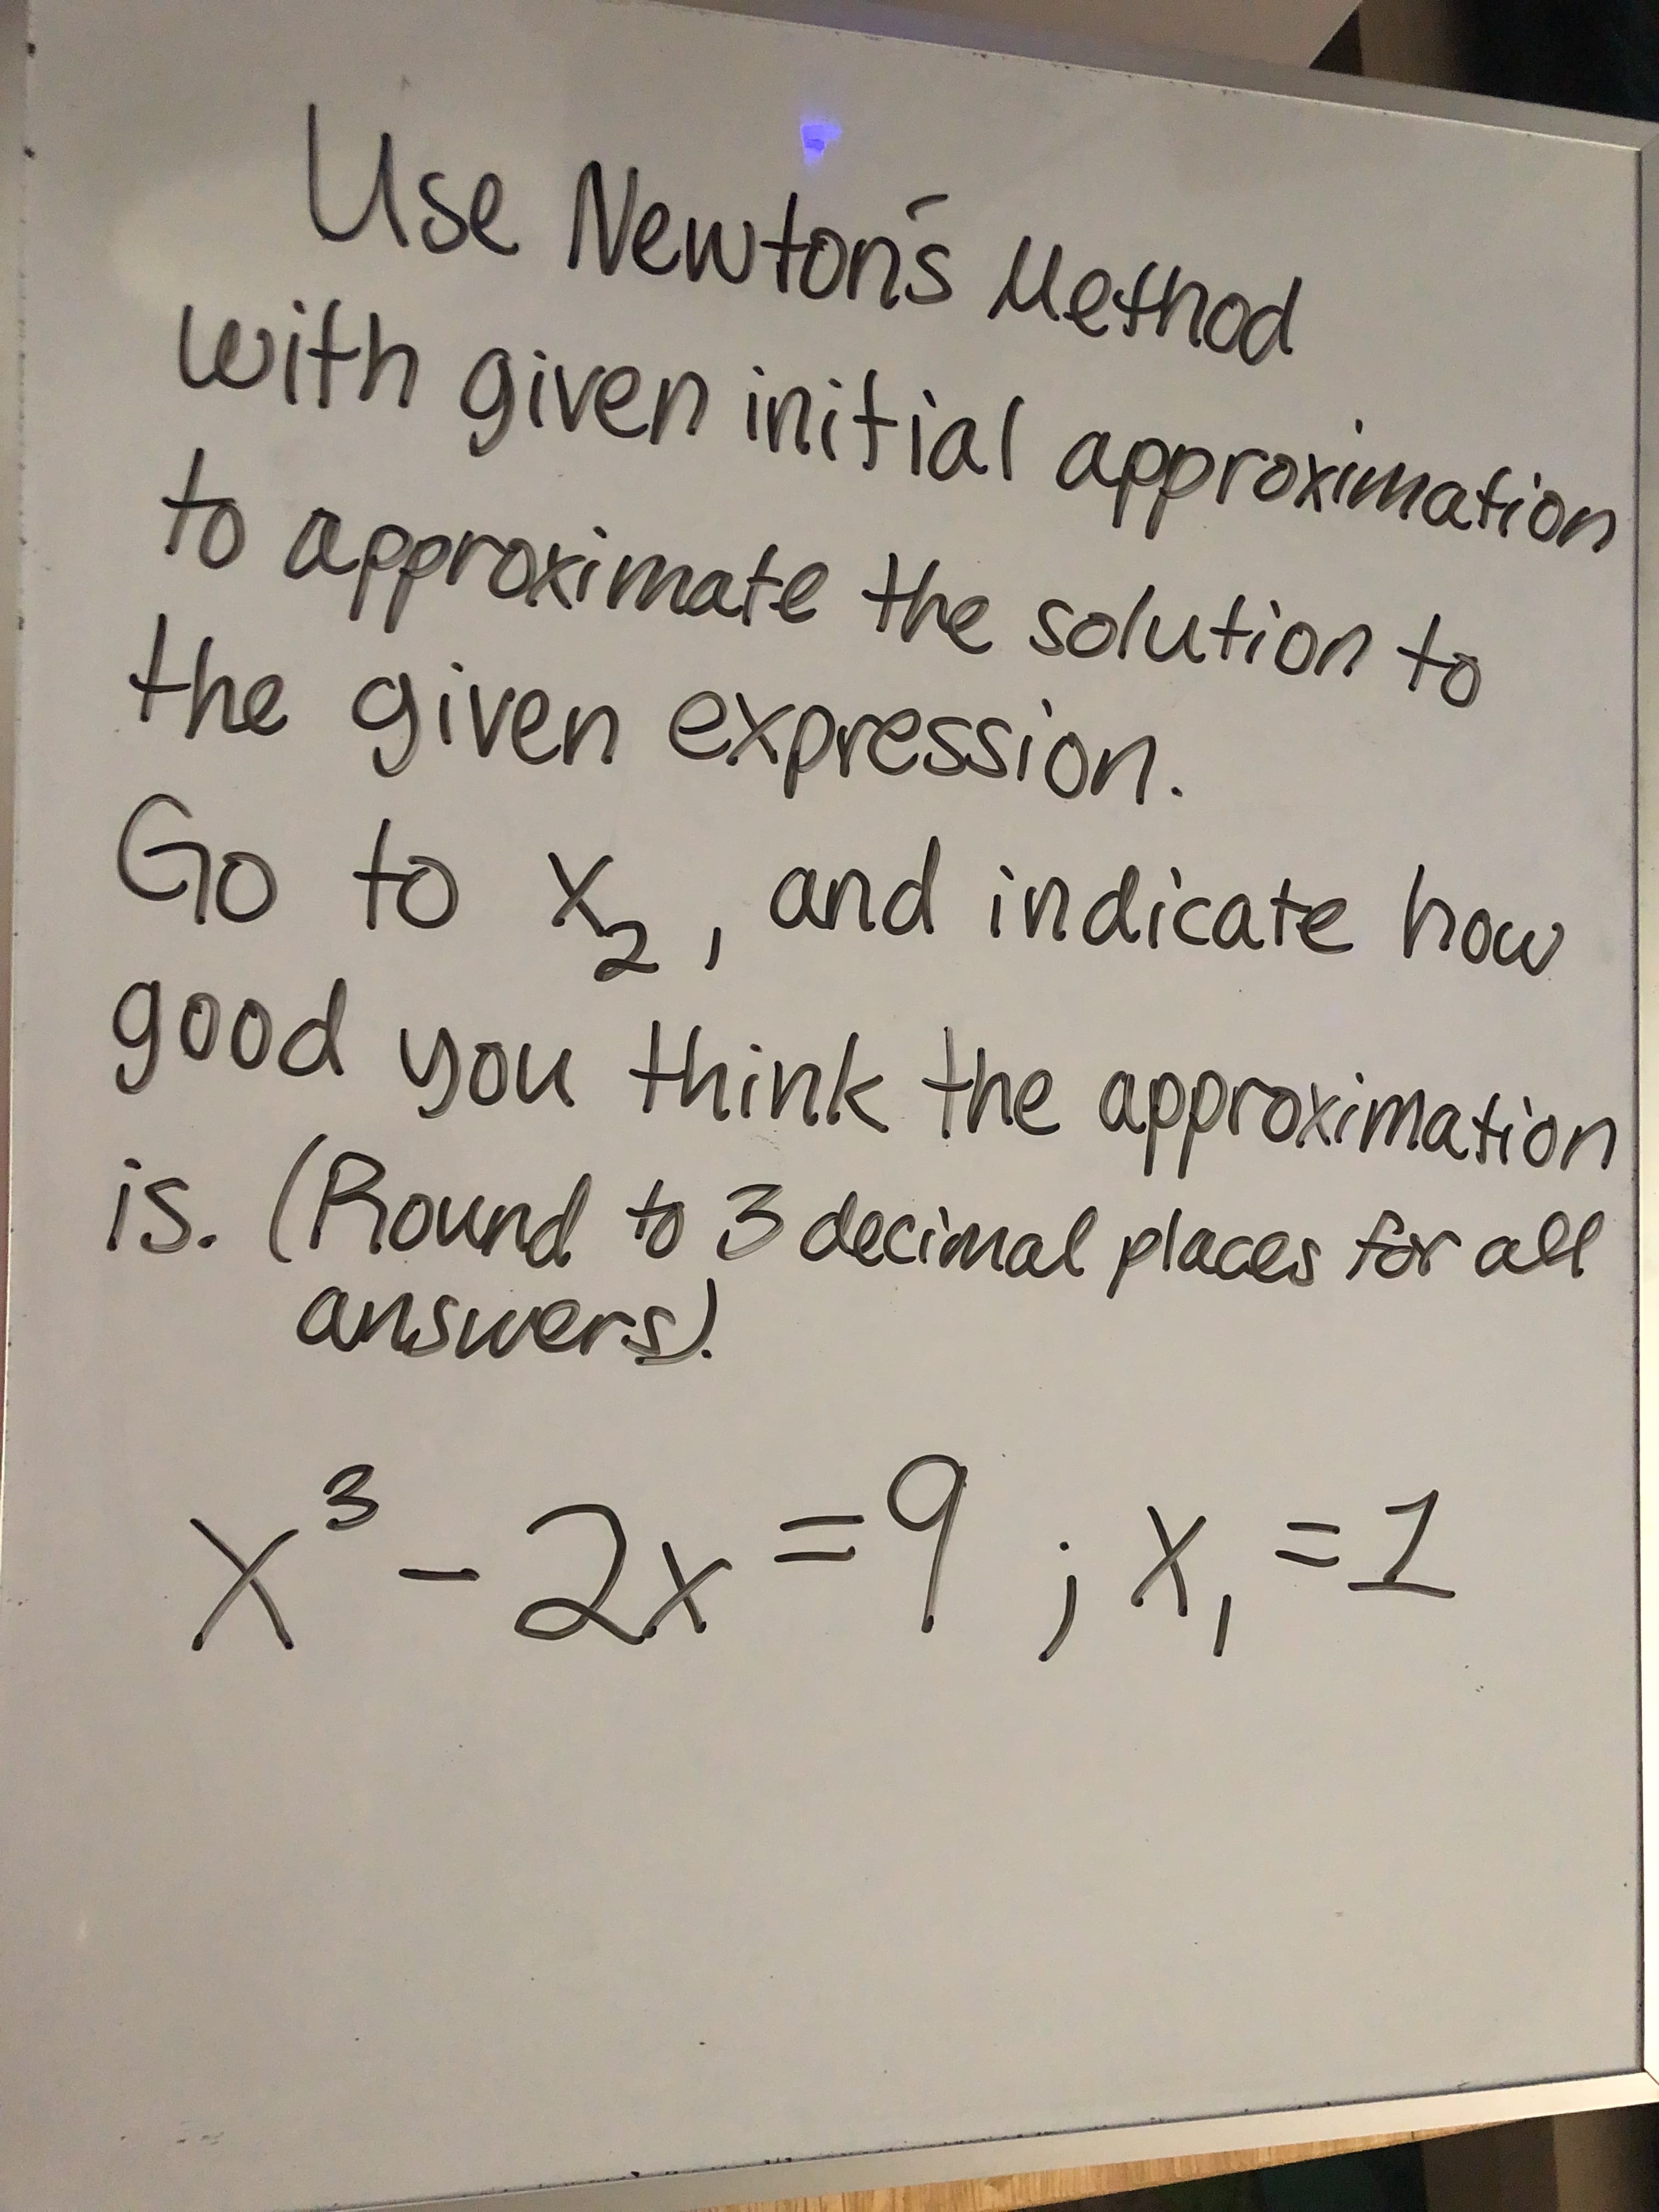 Use Newtons Method
with given initial approximation
to
o appraximate the solution to
the given expression.
Go to x,, and indicate houw
good you think the approximation
is. (Round to 3 decinnal places for all
answers.
x³-2x=9;x,=1
